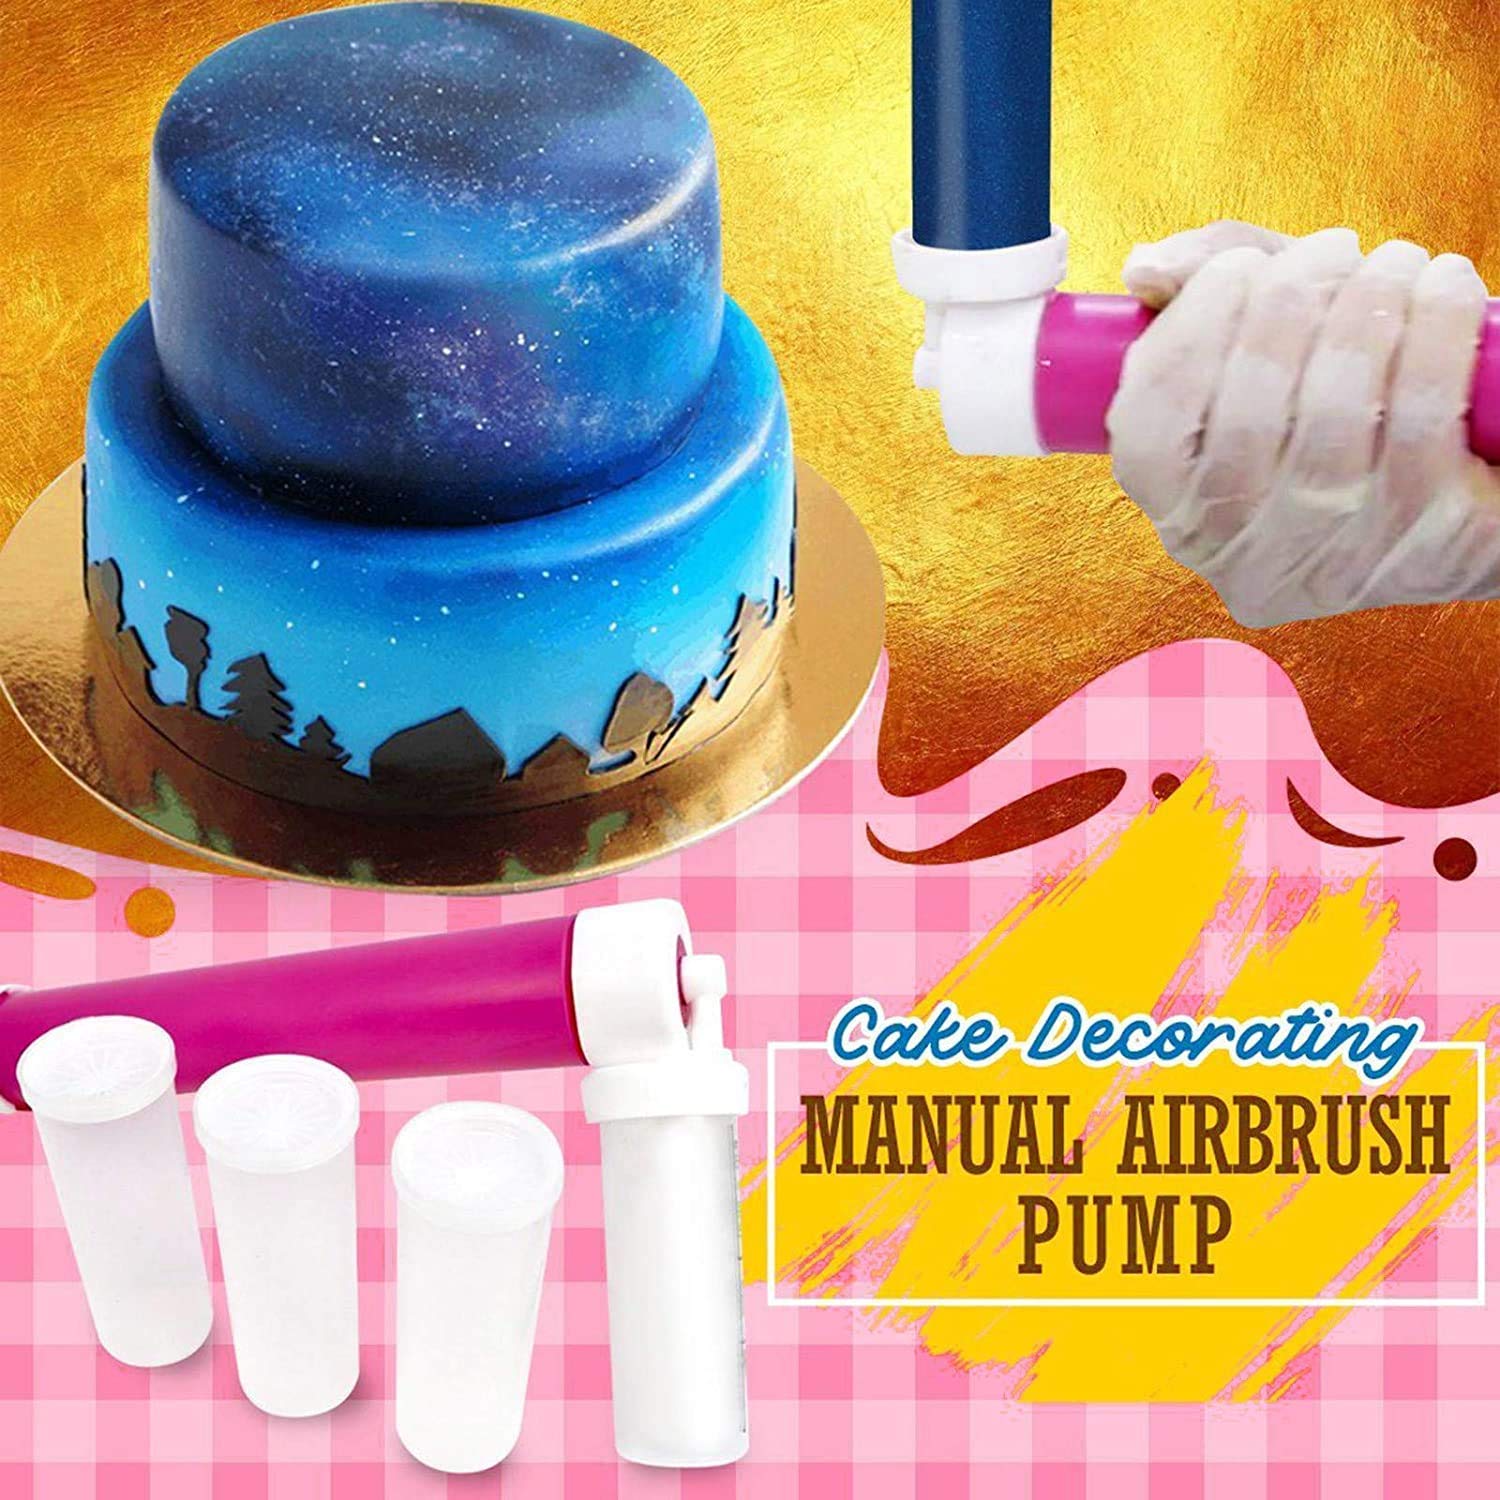 Manual Airbrush for Cakes Glitter Decorating Tools, DIY Baking Cake Airbrush  Pump Coloring Spray Gun with 4 Pcs Tube, Kitchen Cake Decorating Kit for  Cupcakes Cookies Desserts 